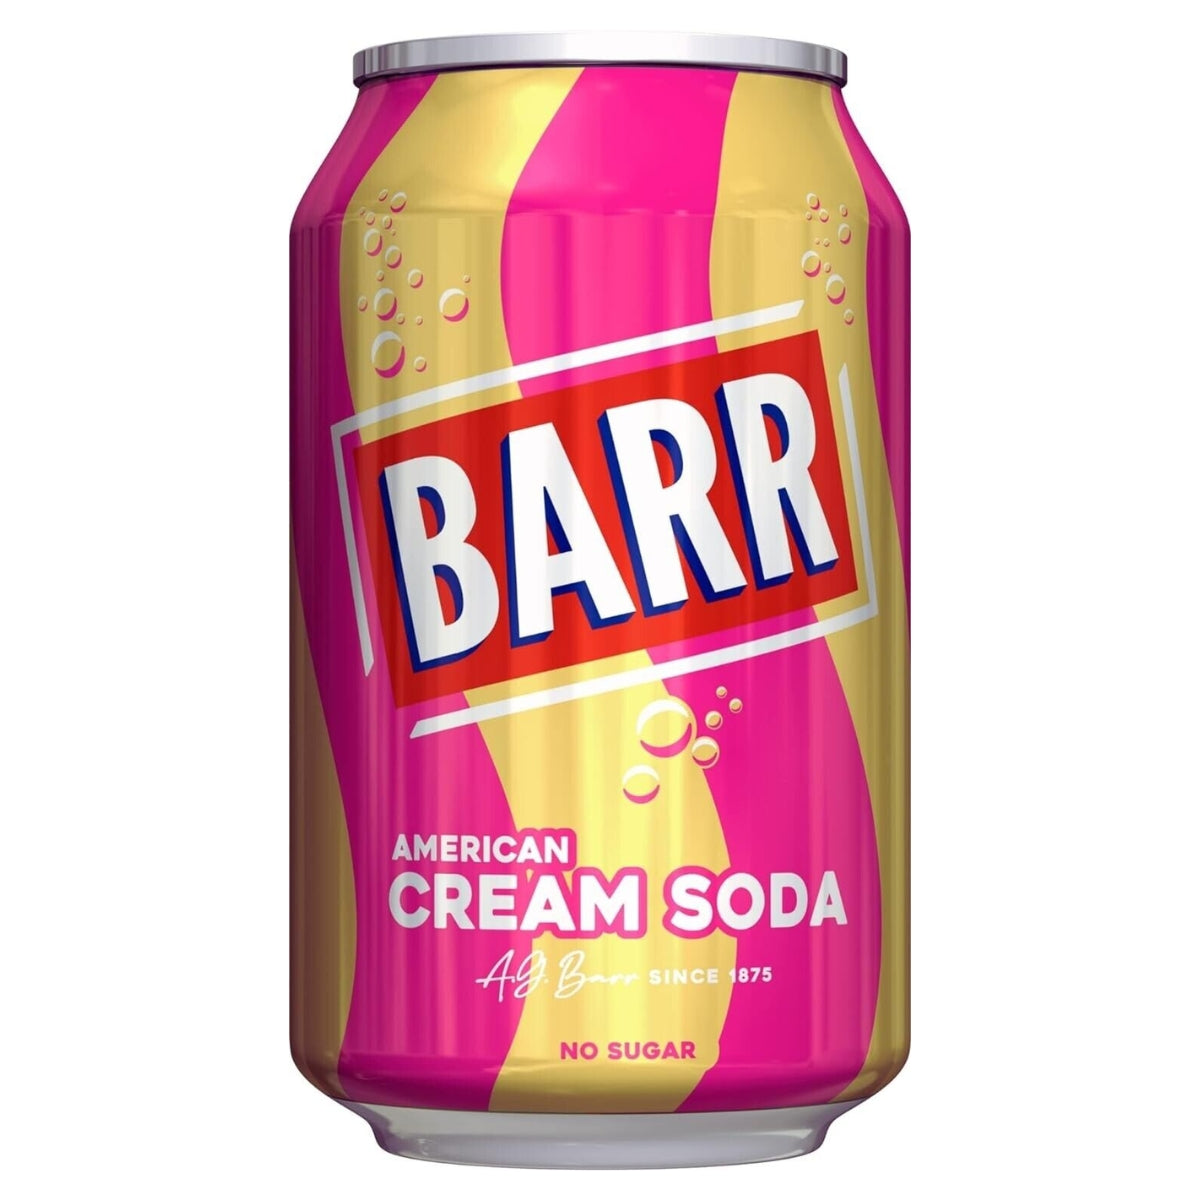 A can of Barr - American Cream Soda - 330ml on a white background.